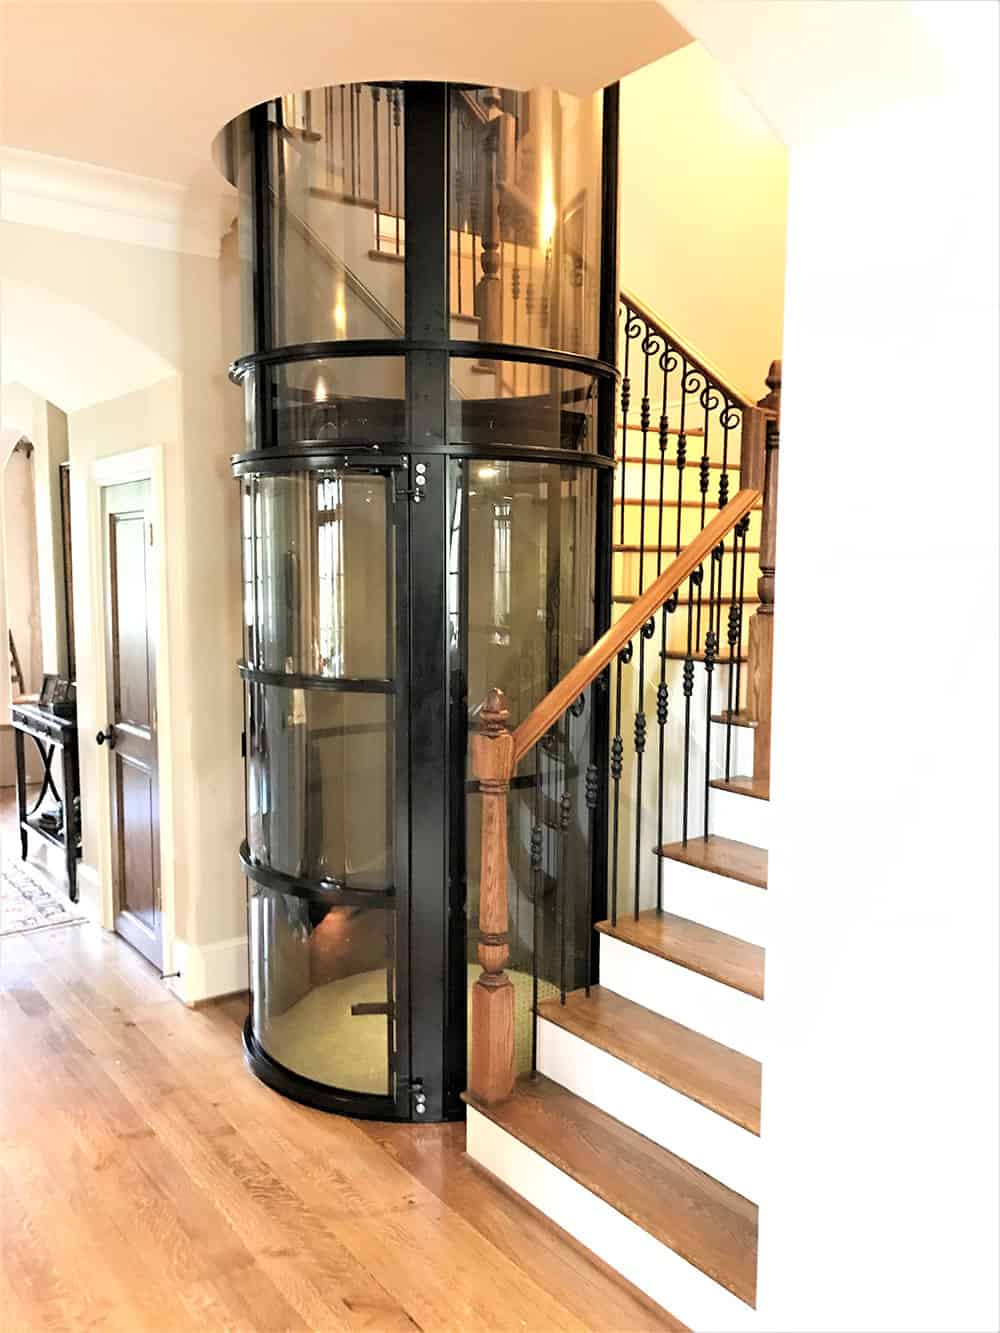 pve elevator installed in stairwell of winding staircase in a memorial area home in houston texas